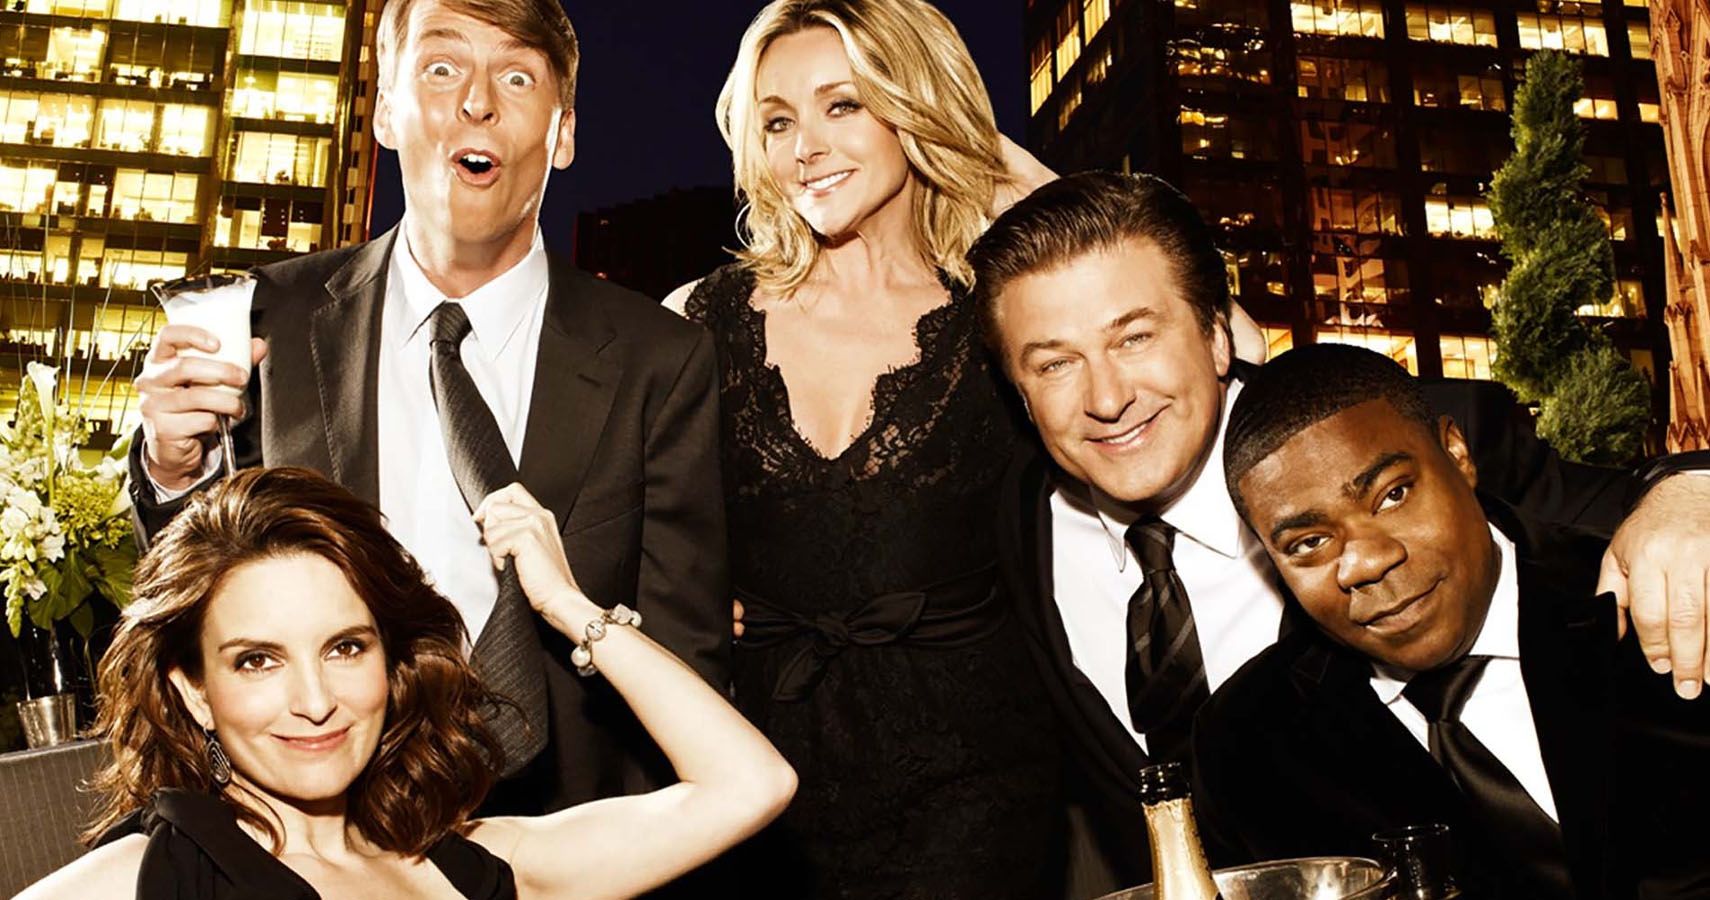 The Cast Of 30 Rock Where Are They Now Featured Image 